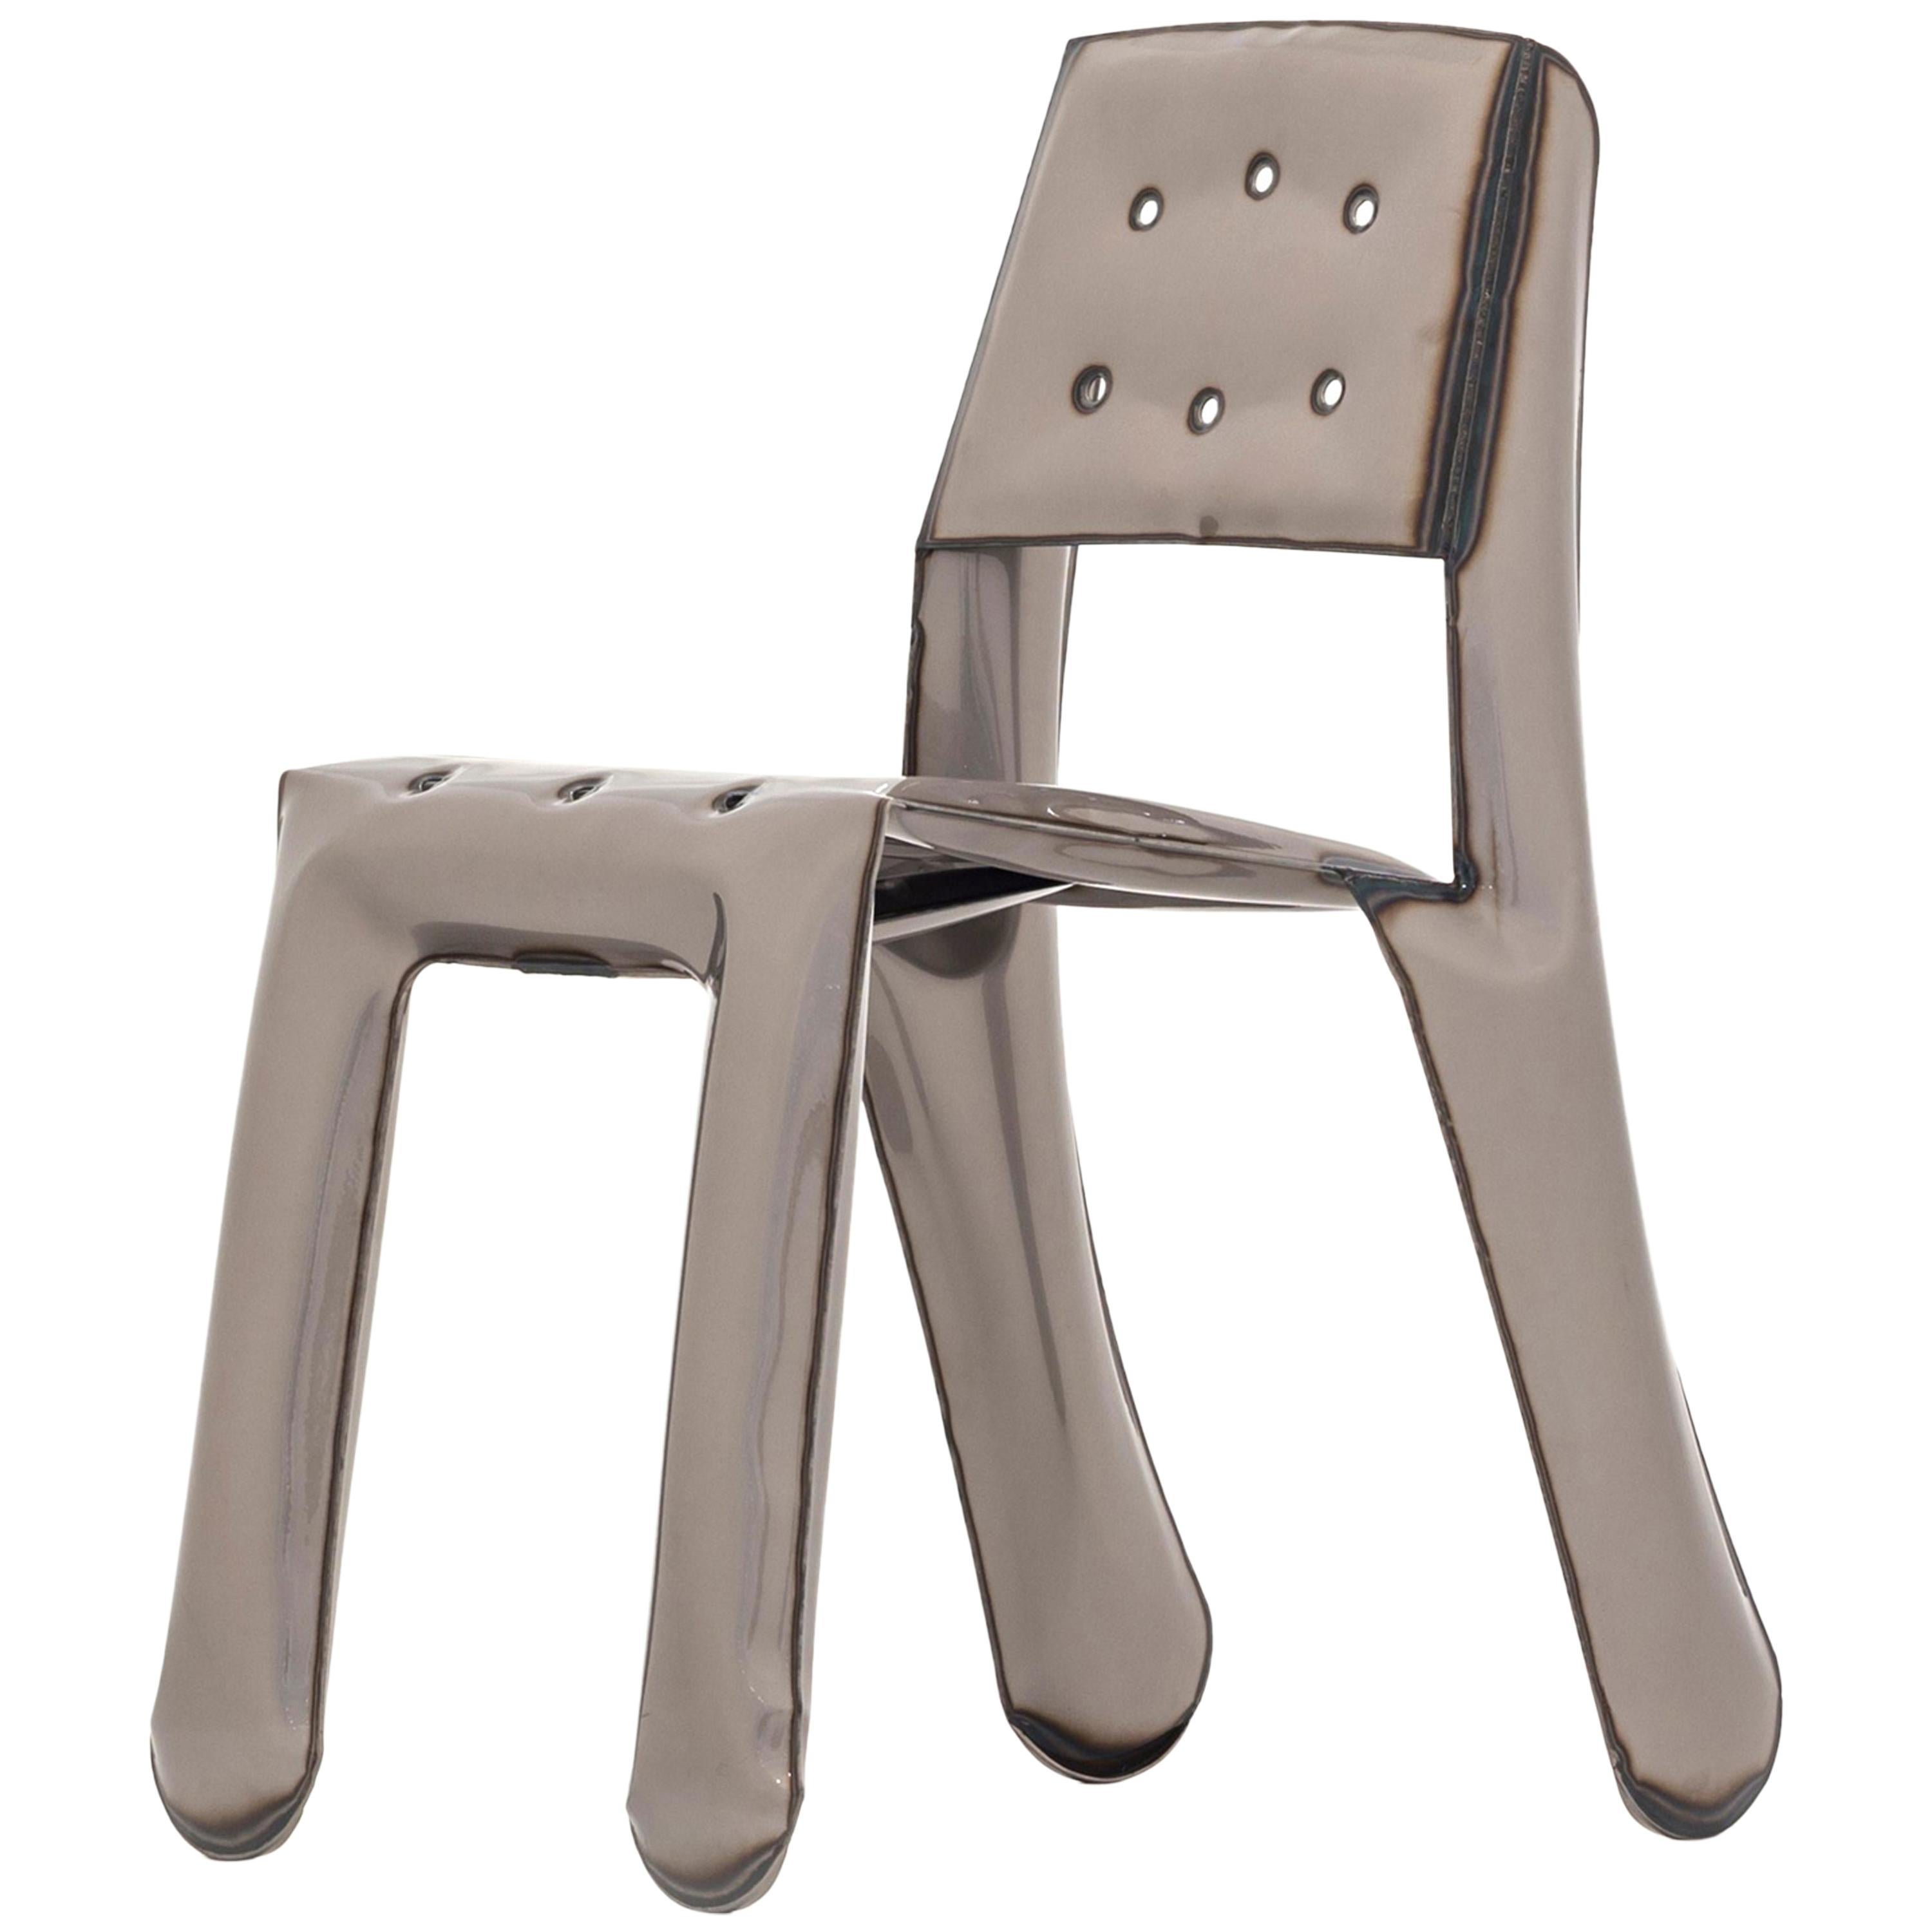 Limited Edition Chippensteel 0.5 Chair in Raw Lacquered Steel by Zieta